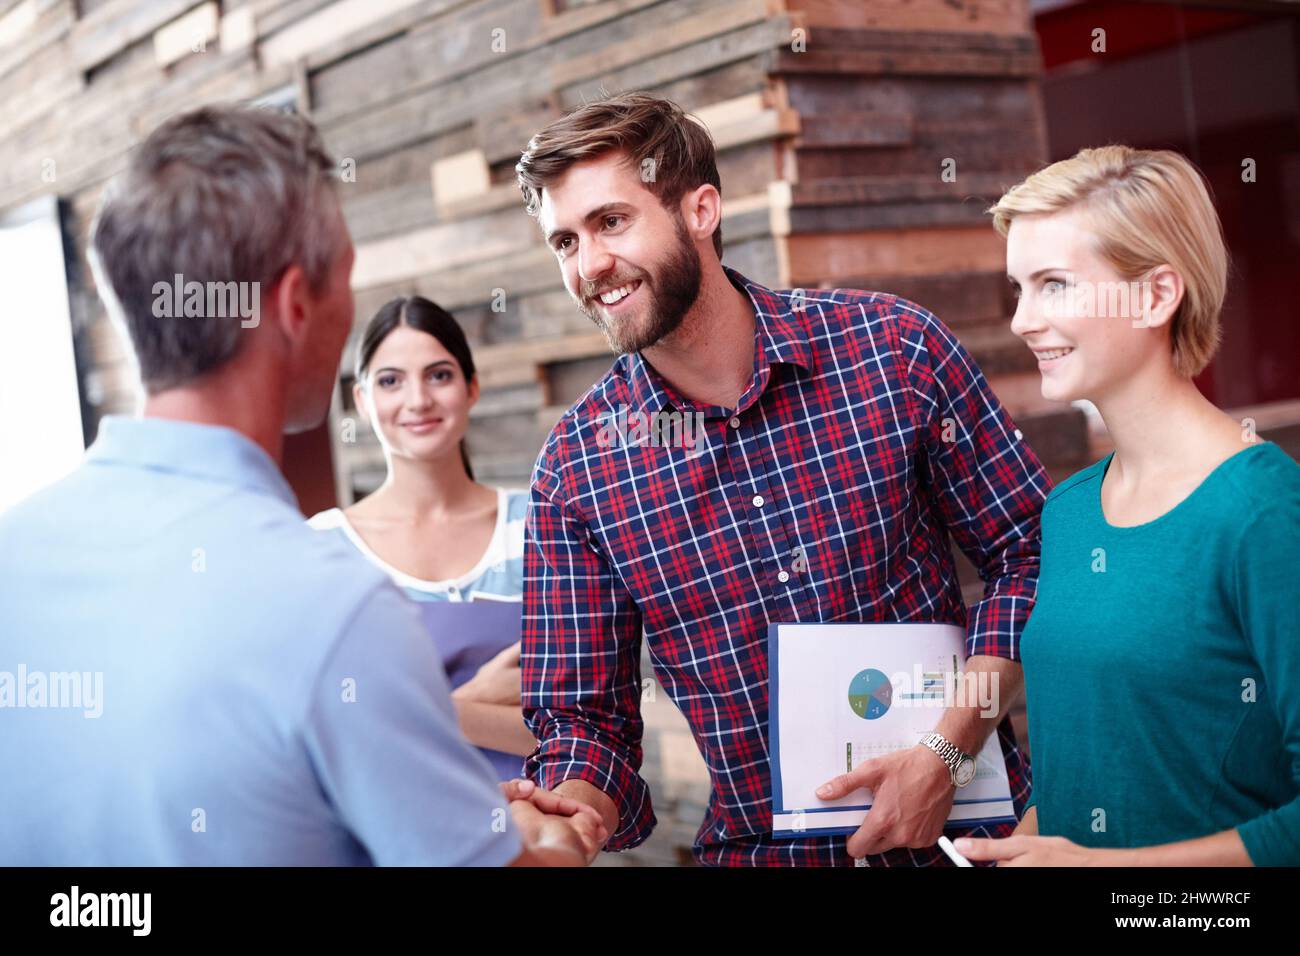 Never stop climbing the corporate ladder. Shot of coworkers shaking hands in an office. Stock Photo